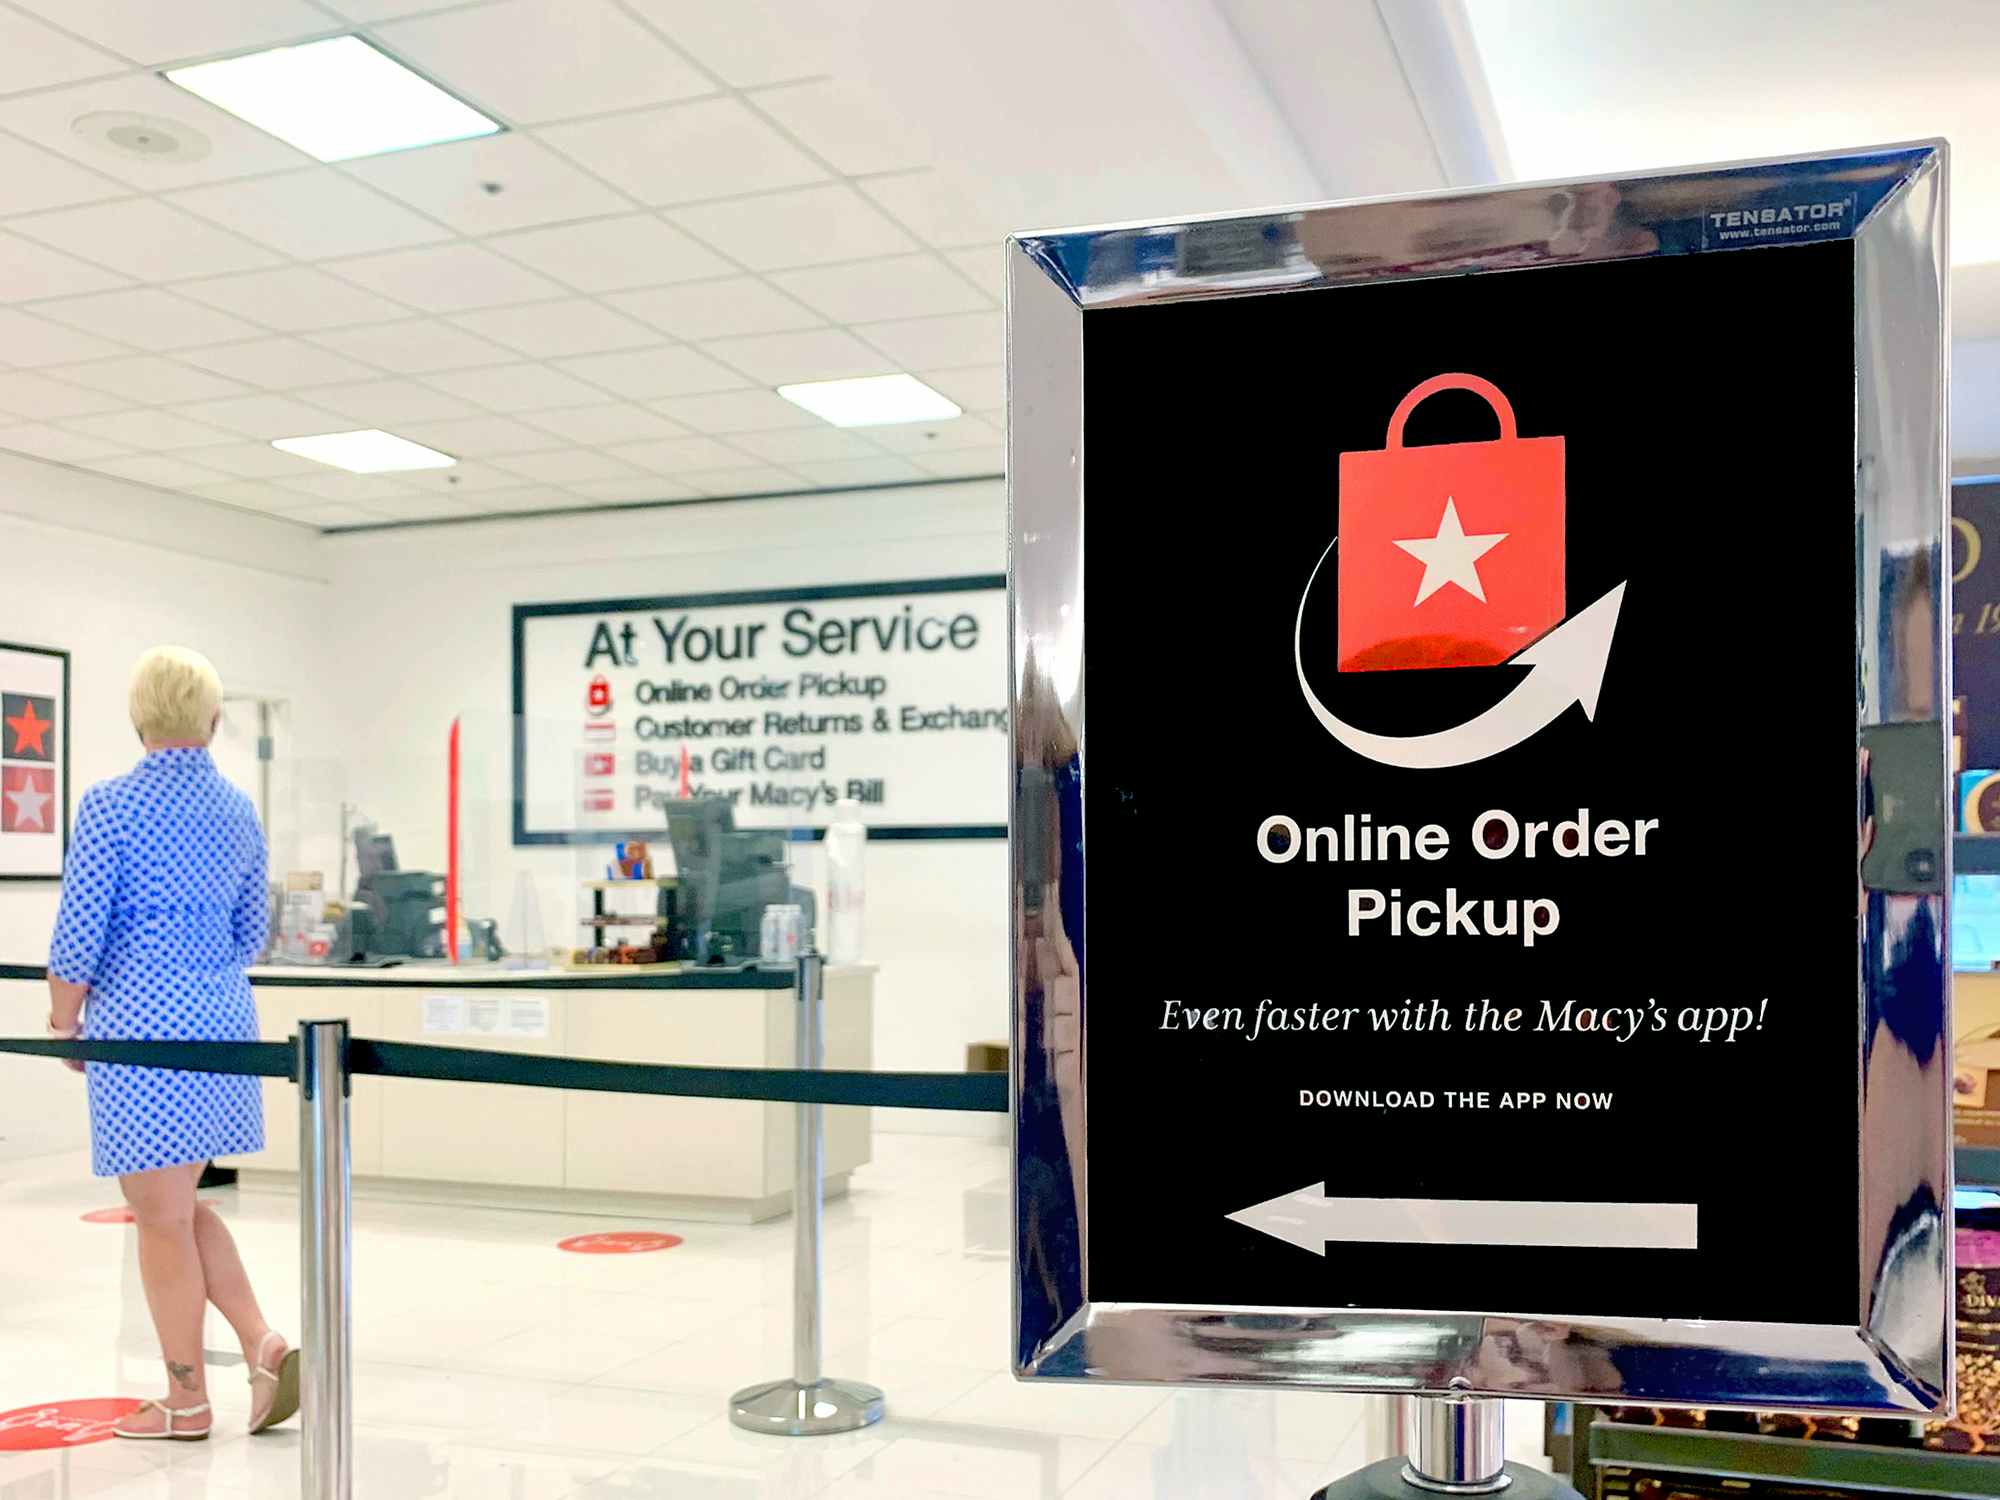 A Macy's Online Order Pickup sign pointing to a roped area where a person is standing in line for the Macy's service desk.